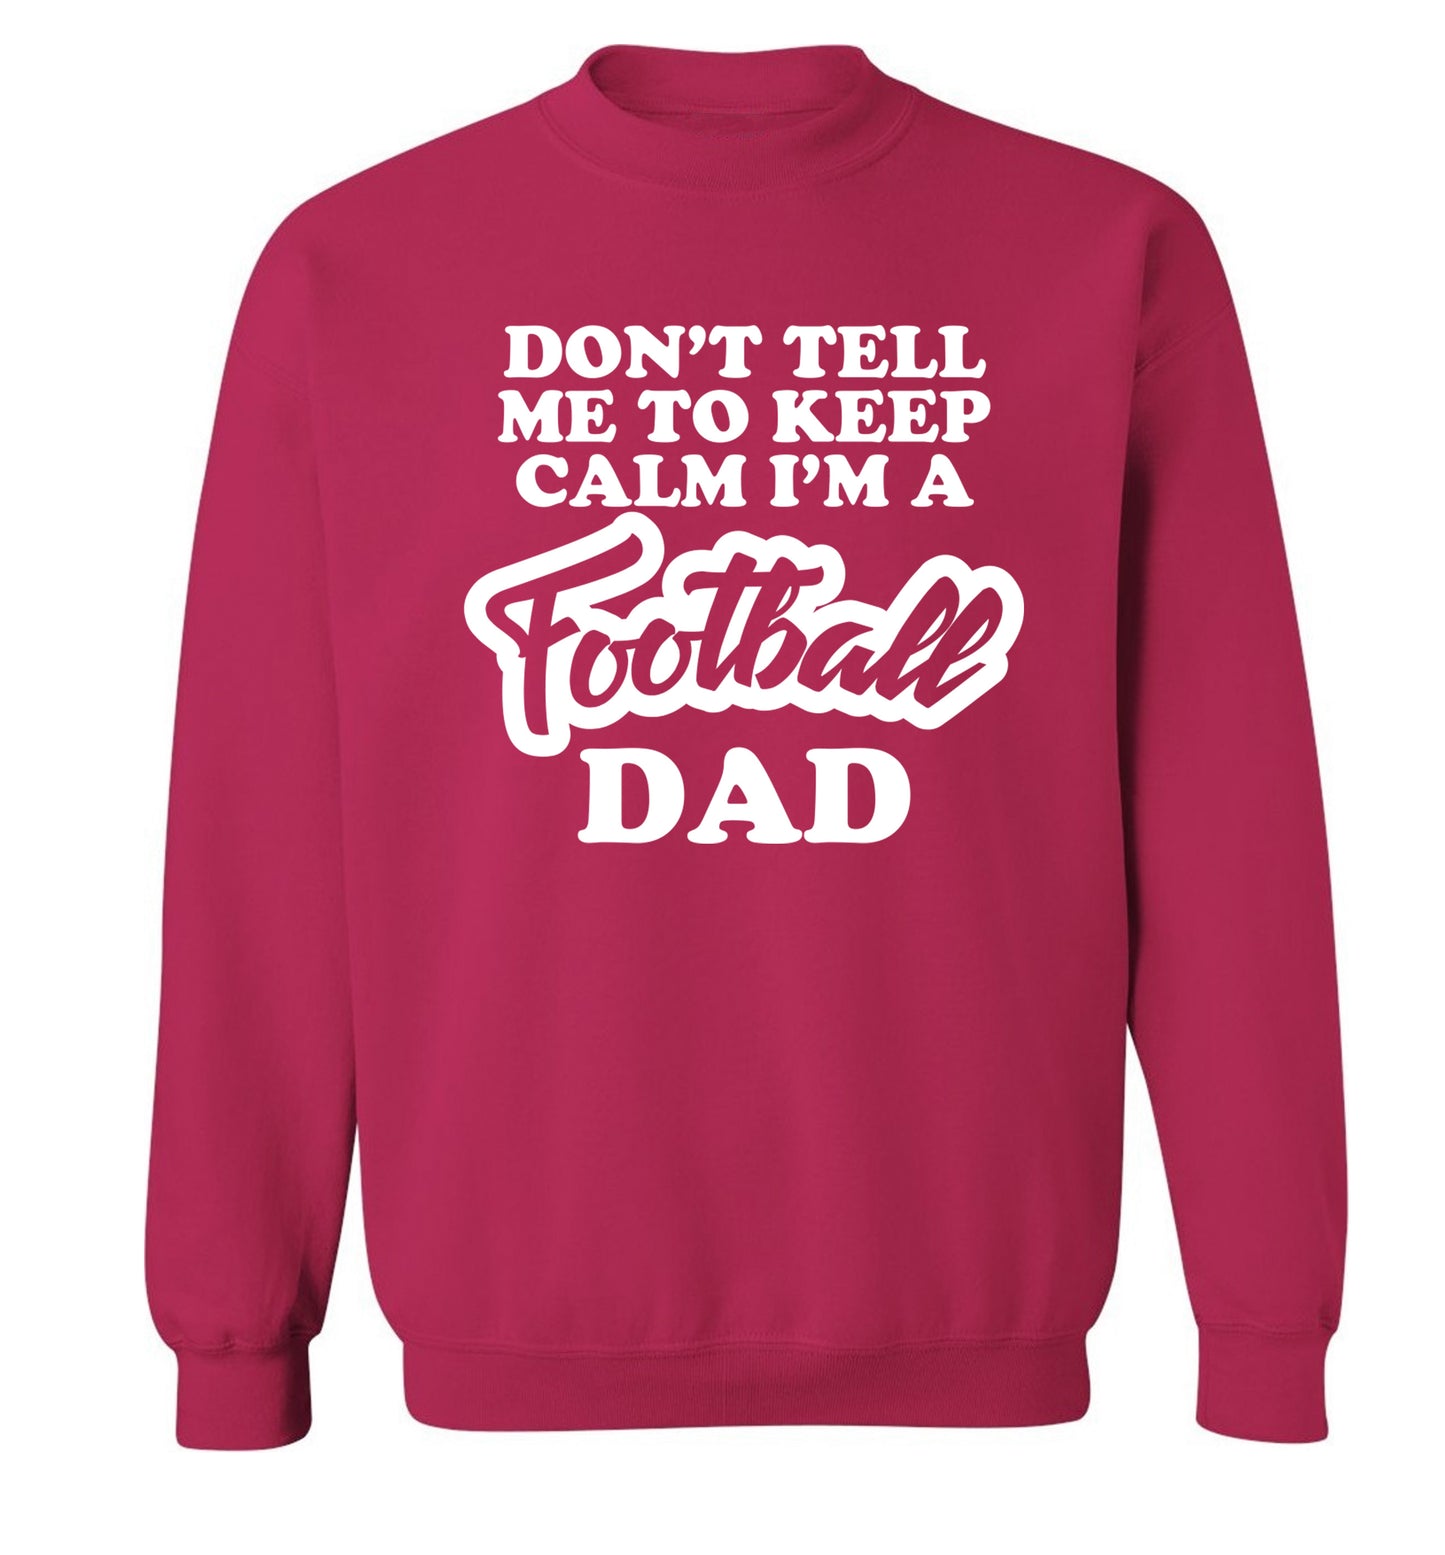 Don't tell me to keep calm I'm a football grandad Adult's unisexpink Sweater 2XL